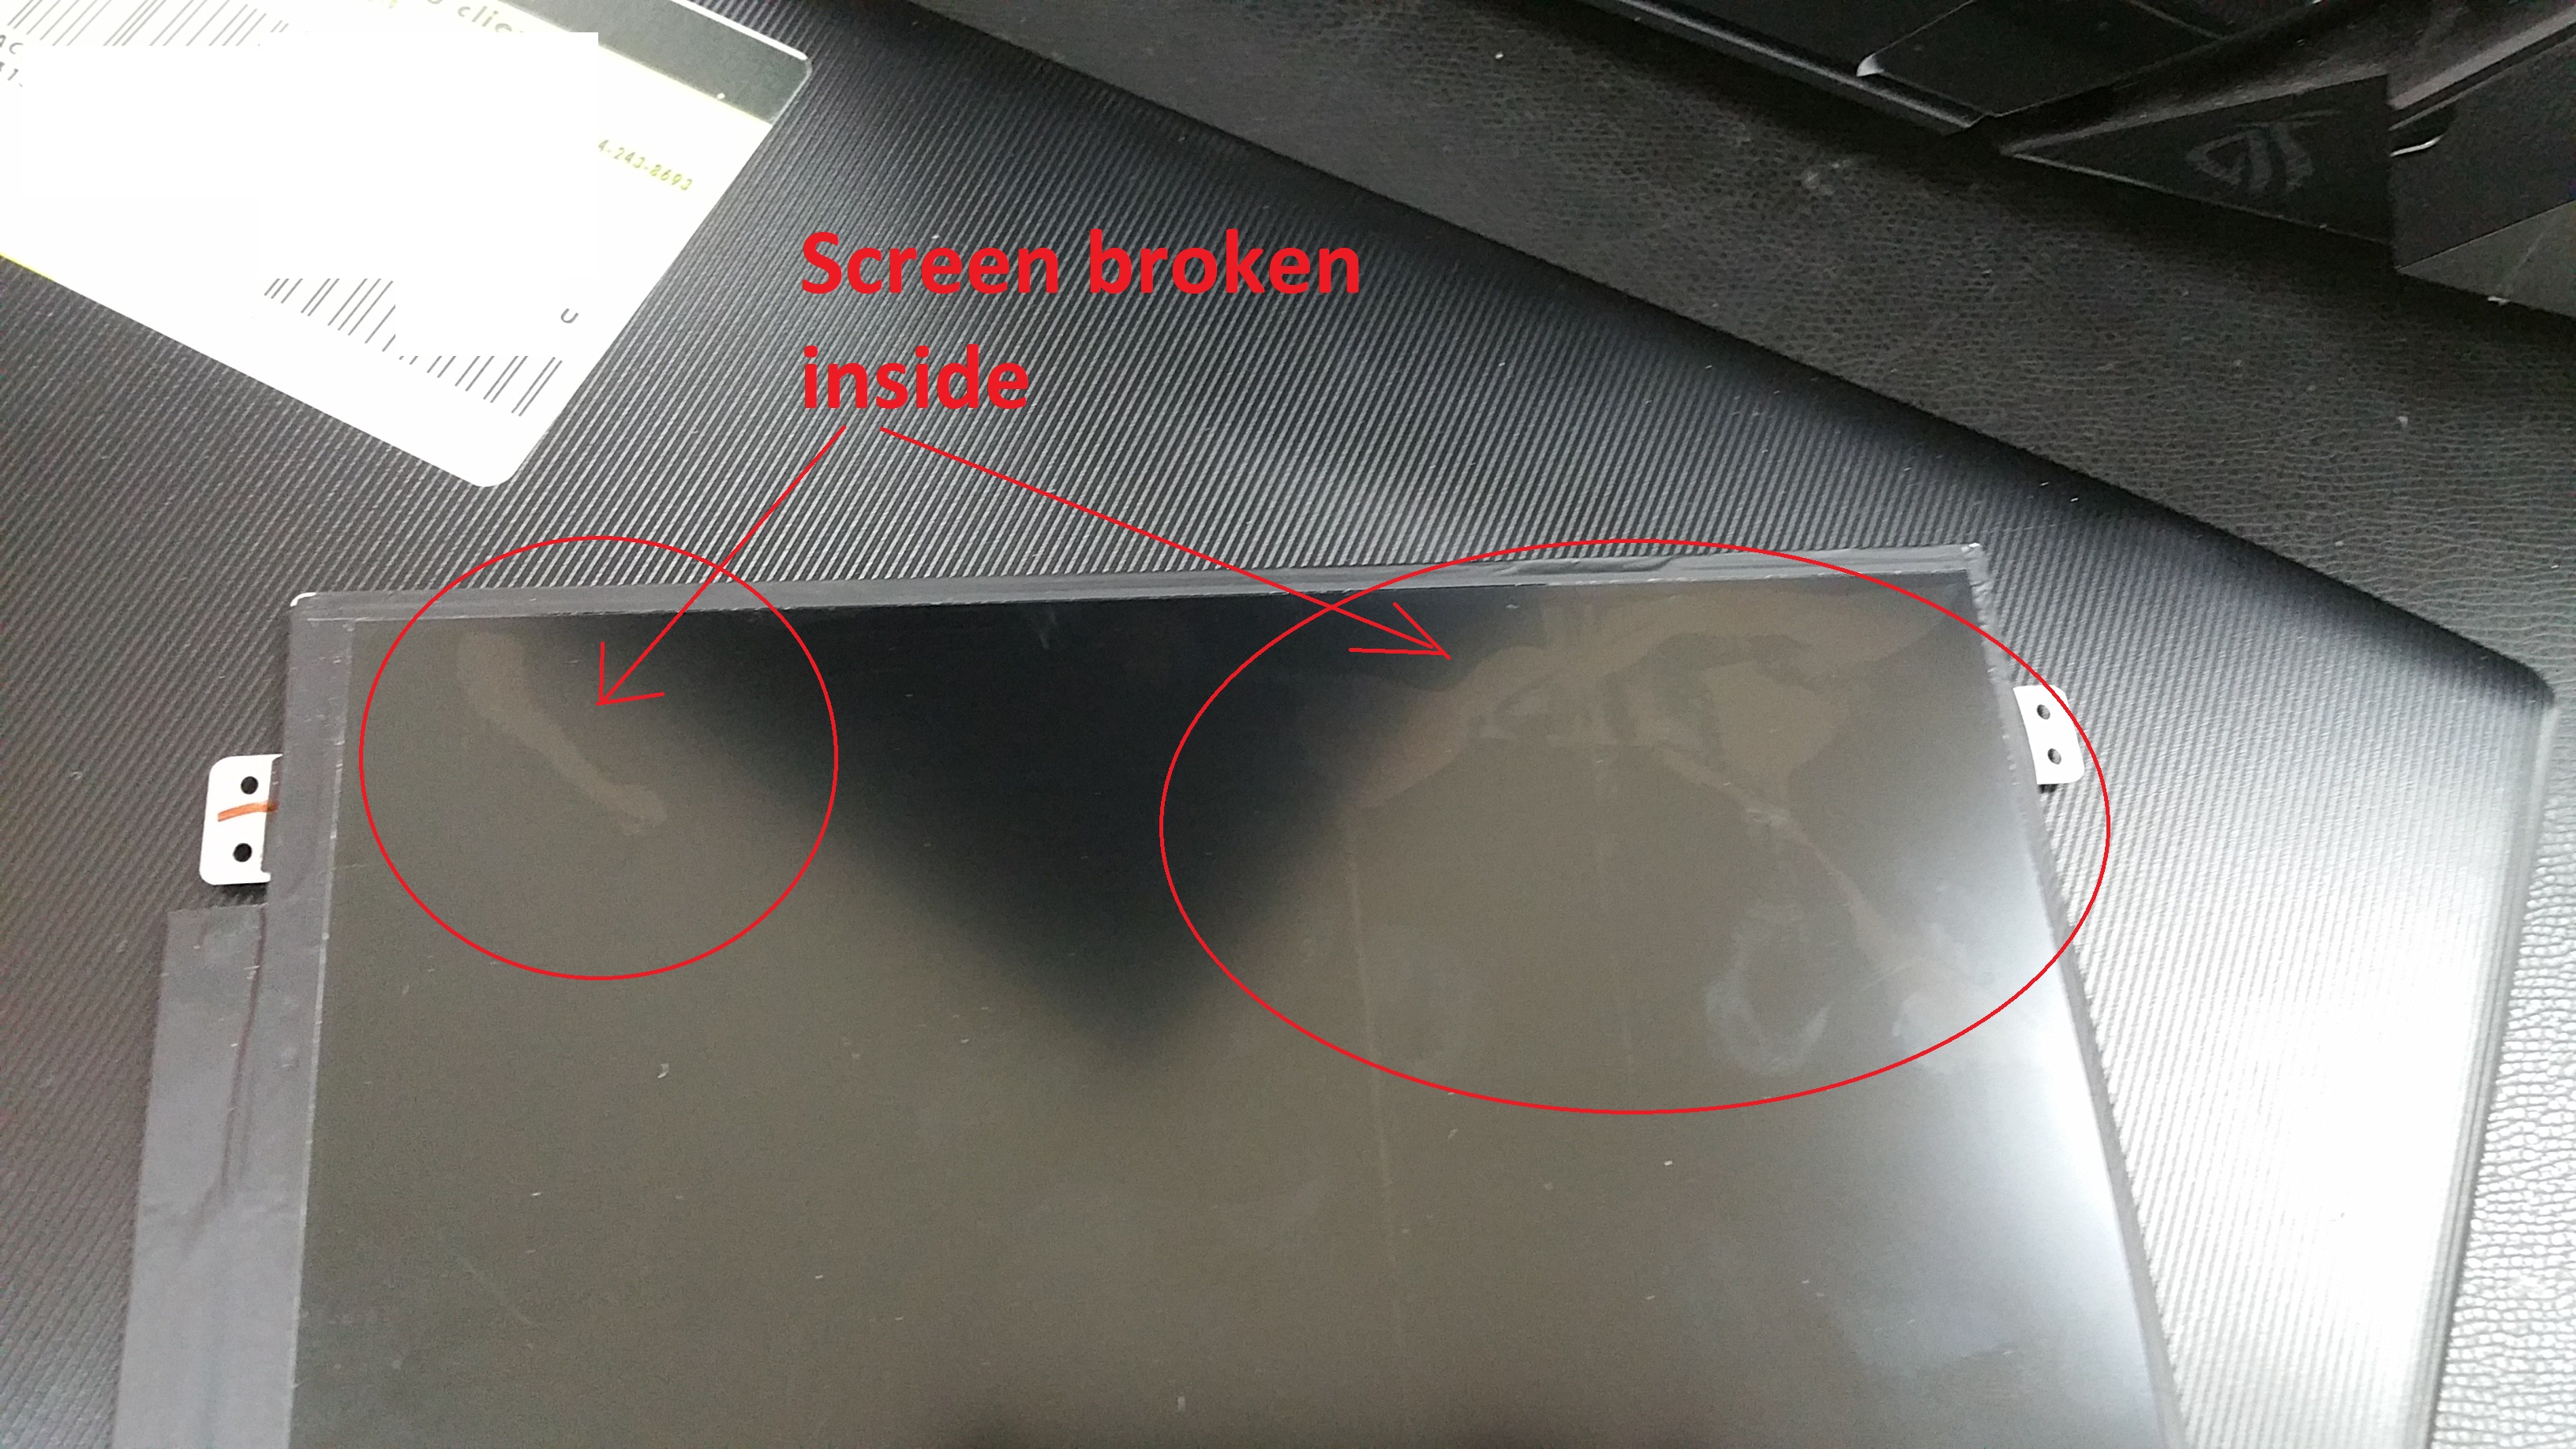 Check for physical damage: Inspect the laptop screen for any visible cracks or damage that may be causing the light spot.
Reset the display settings: Resetting the display settings to the default values can help eliminate any software-related issues causing the light spot.